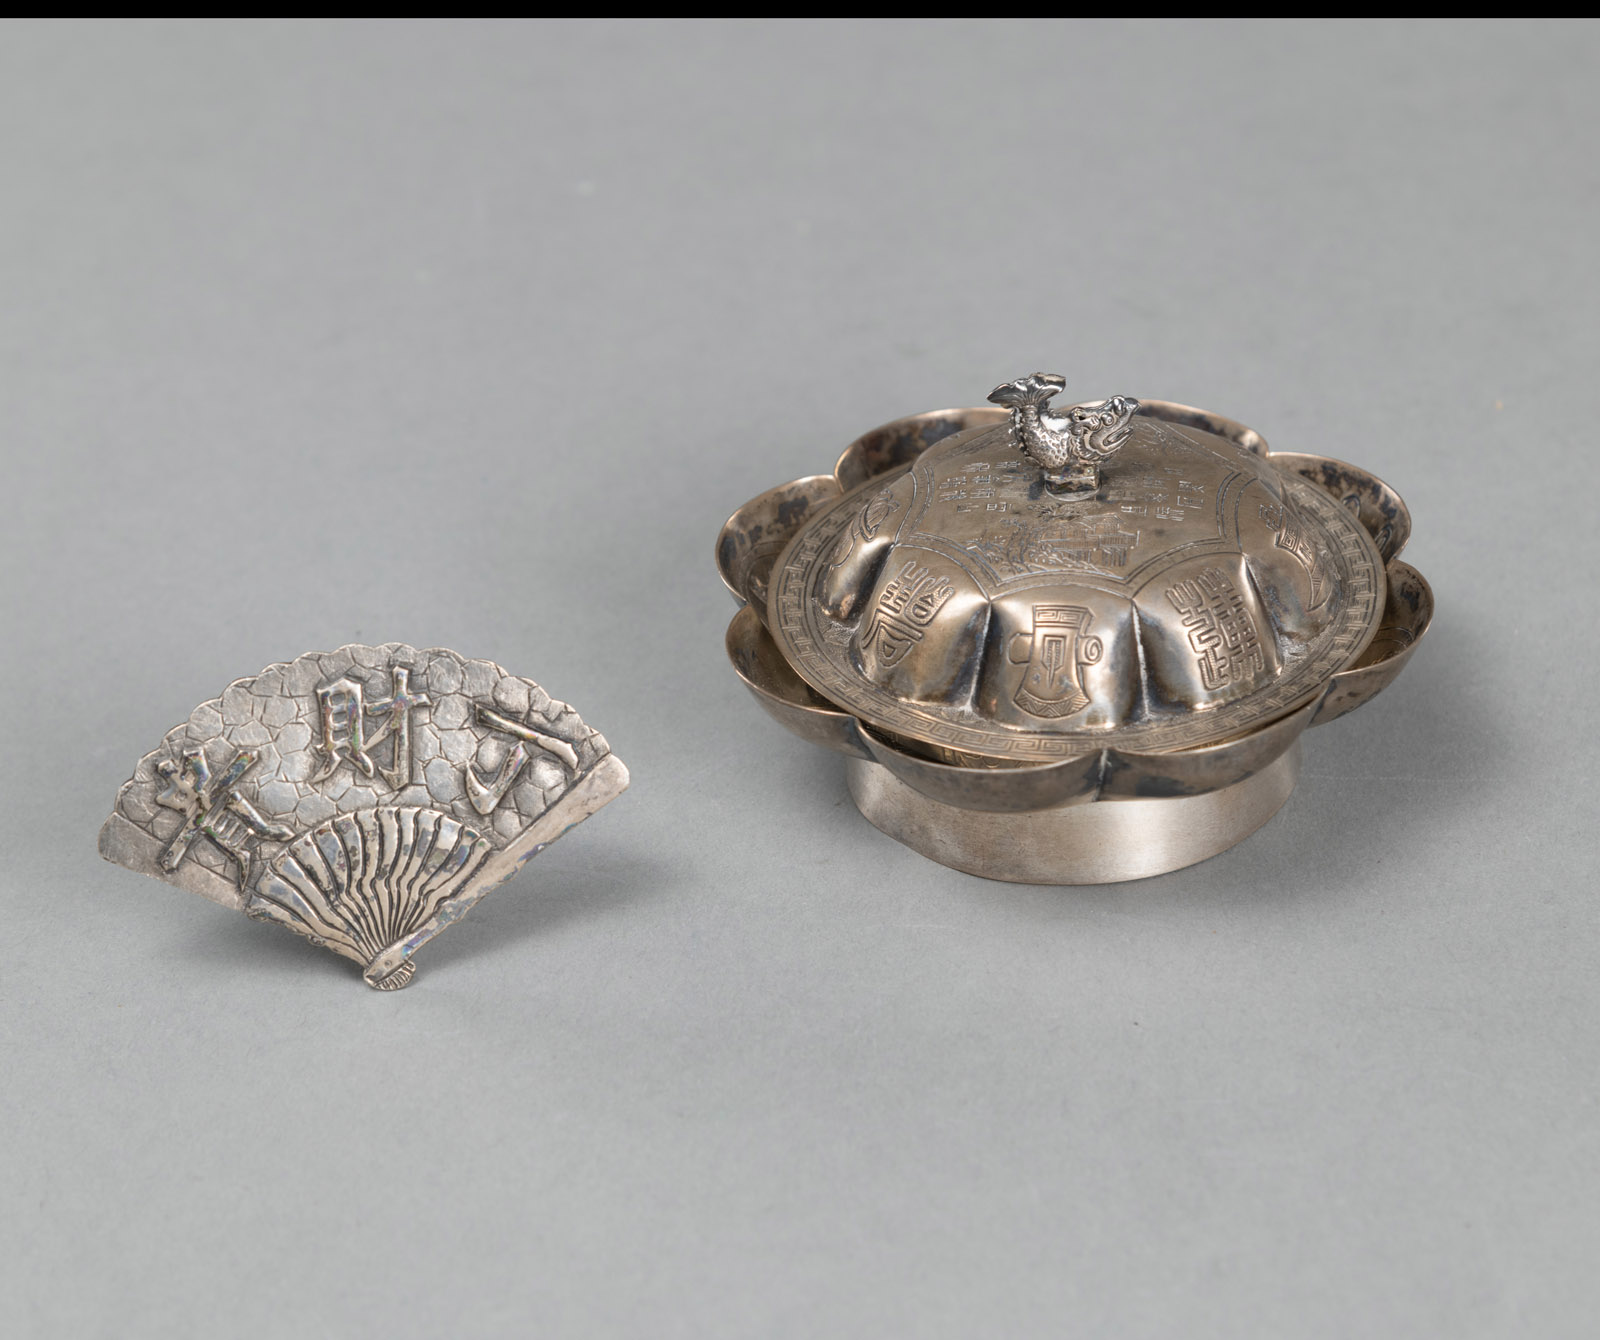 <b>COVER AND SAUCER FOR A TEA CUP AND A SILVER FAN WITH AUSPICIOUS INSCRIPTION 'DING CAI GUI'</b>